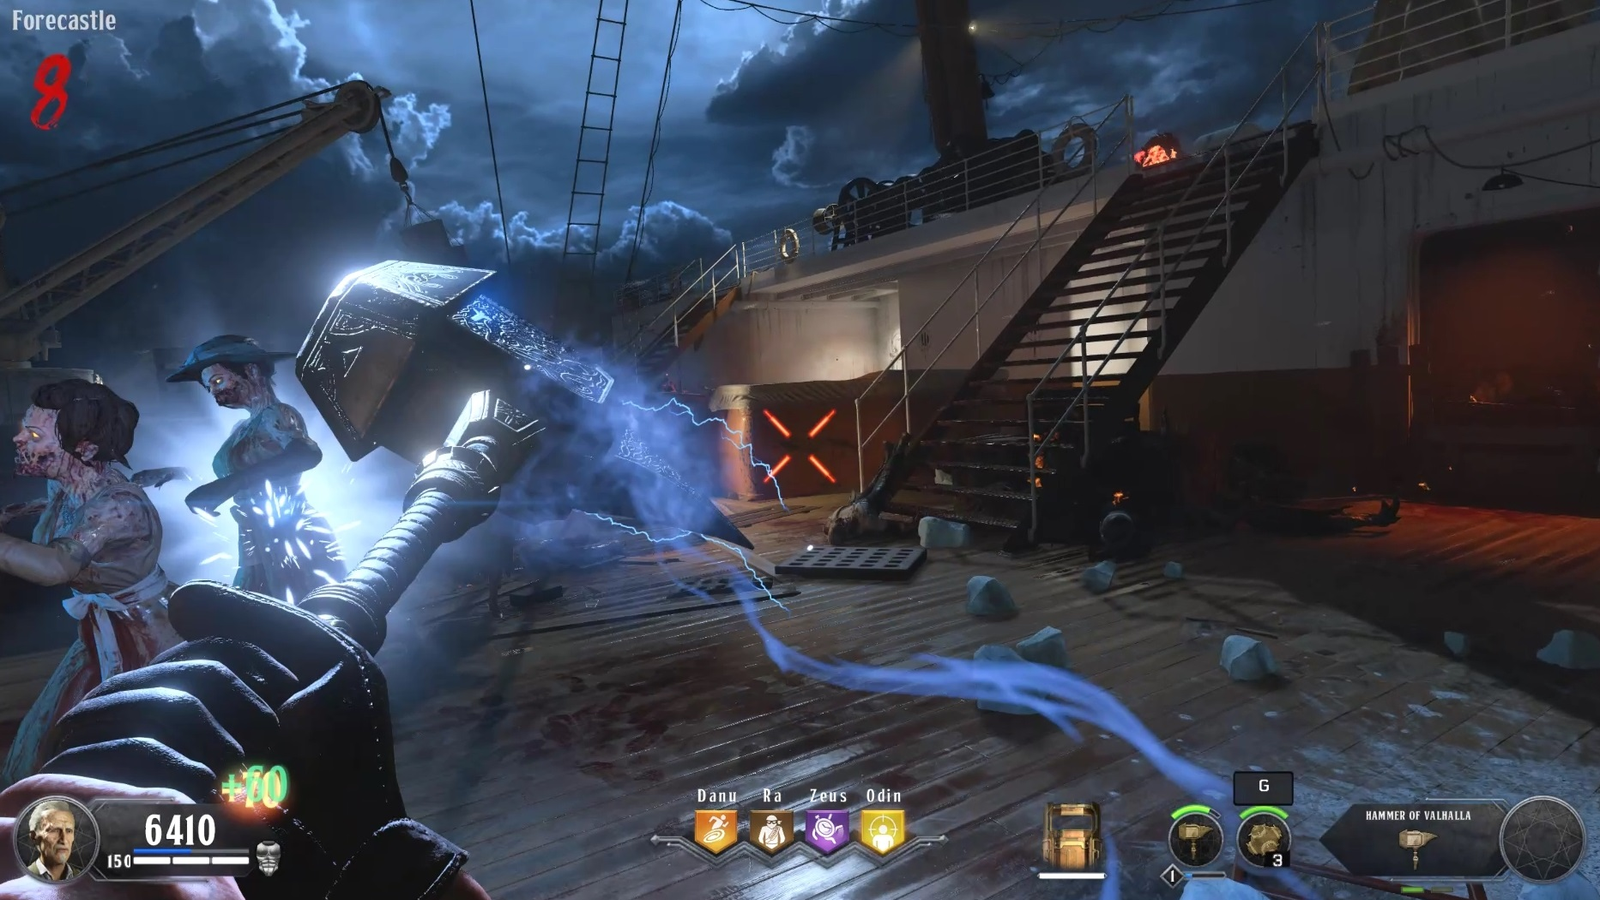 Call of Duty Black Ops 4 Zombies Guide – Voyage of Despair Tips